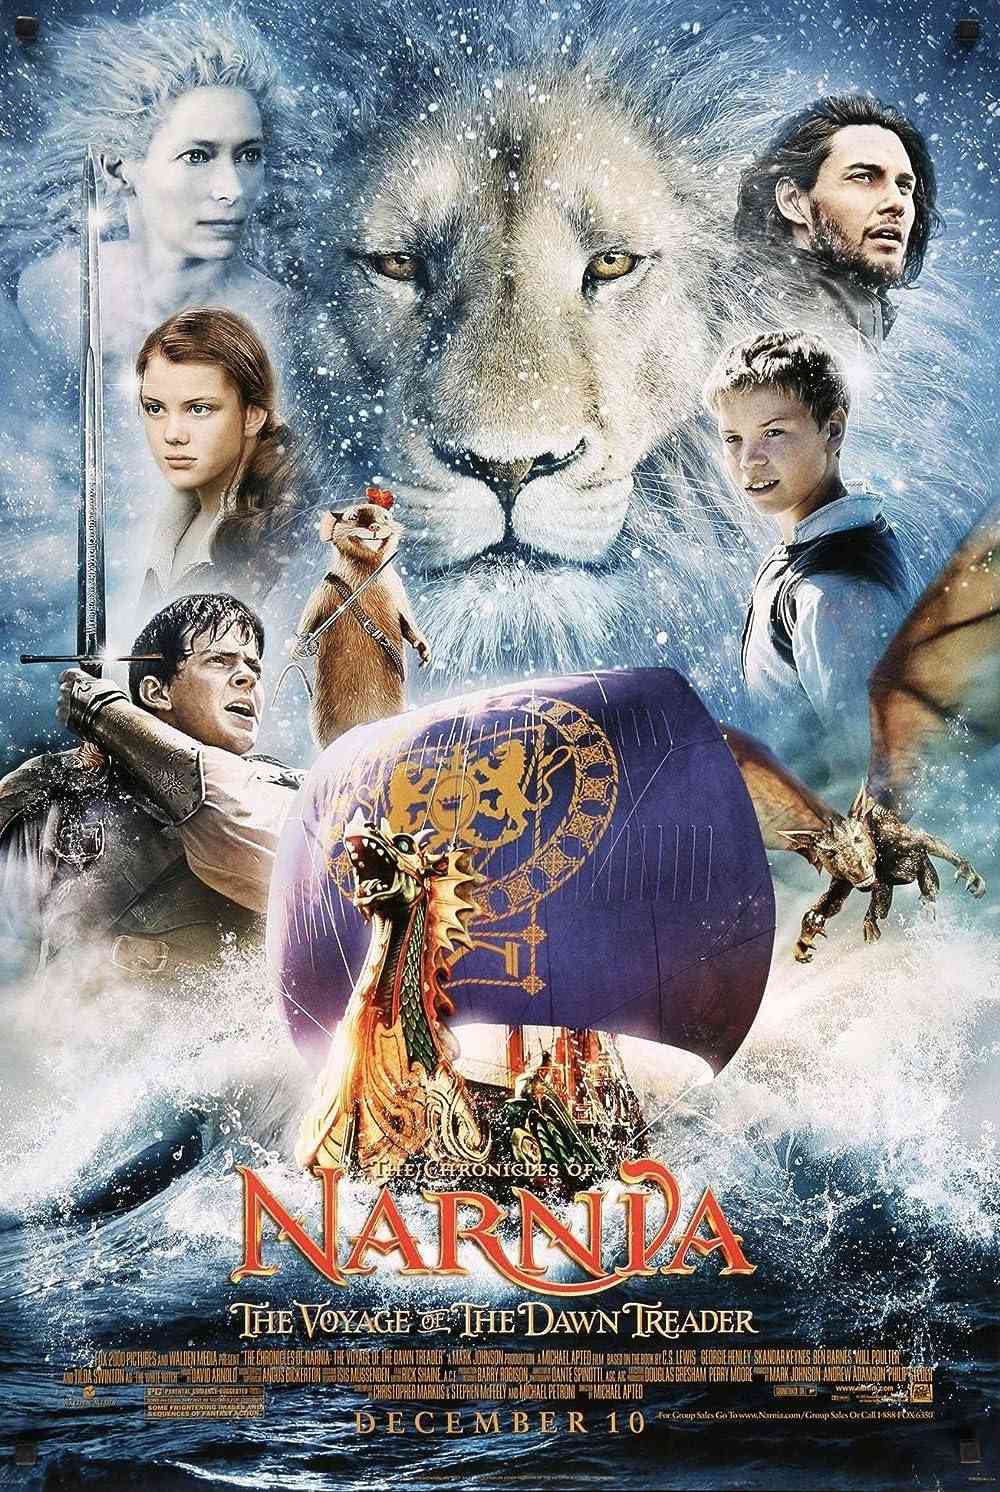 Netnaija - The Chronicles of Narnia: The Voyage of the Dawn Treader (2010)